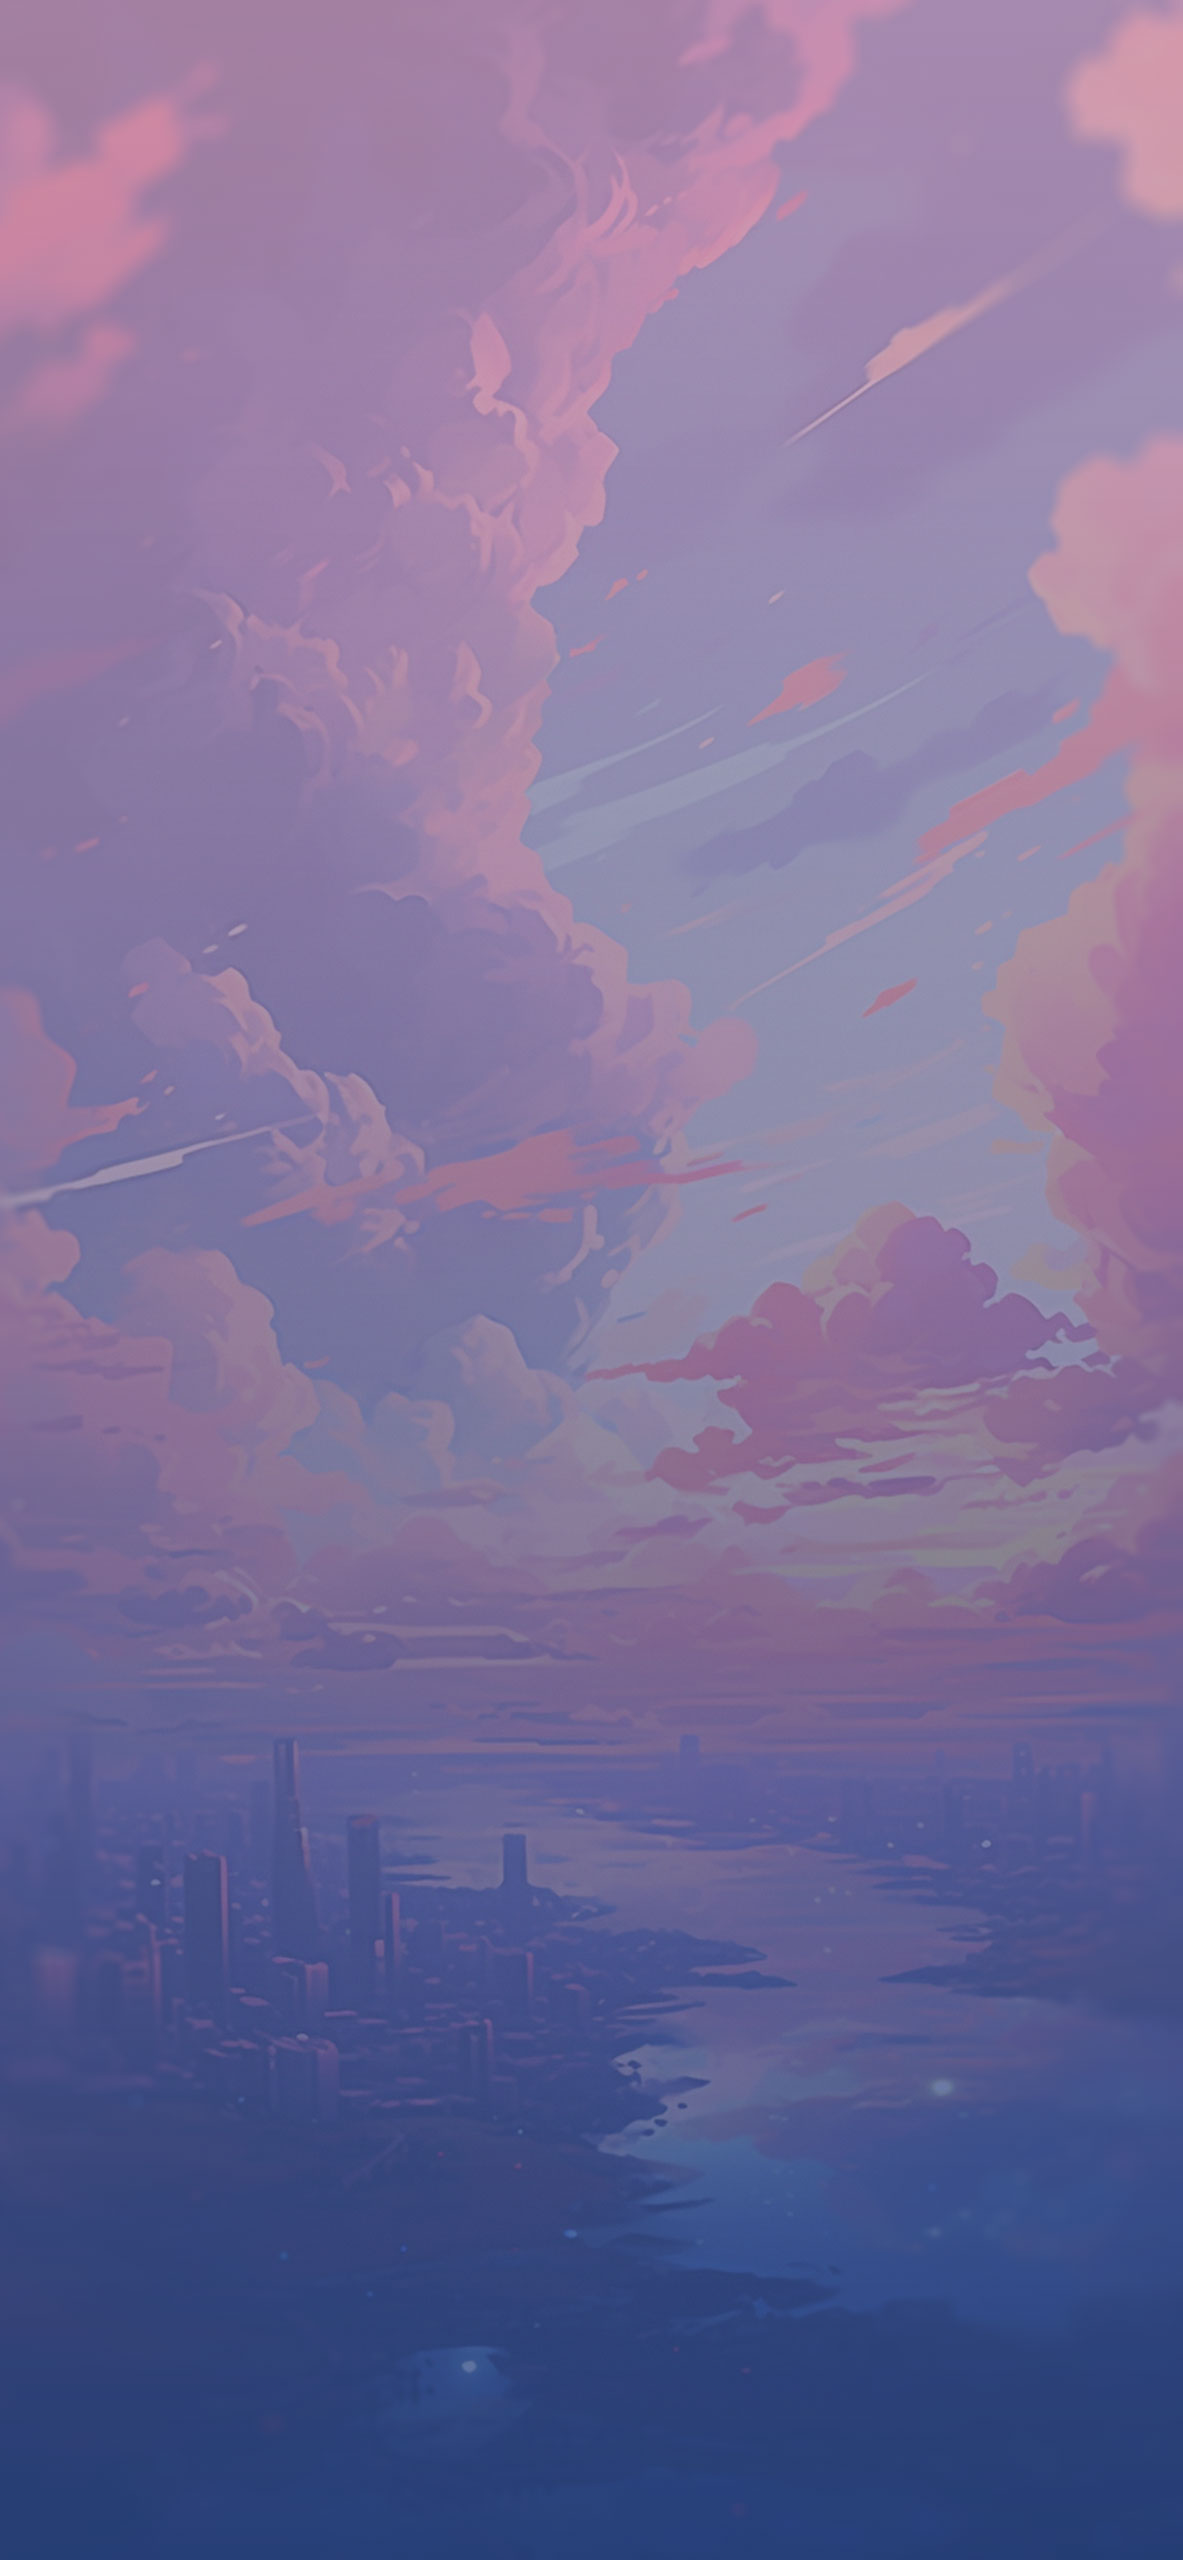 Colorful clouds above the city wallpaper Beautiful sky & city